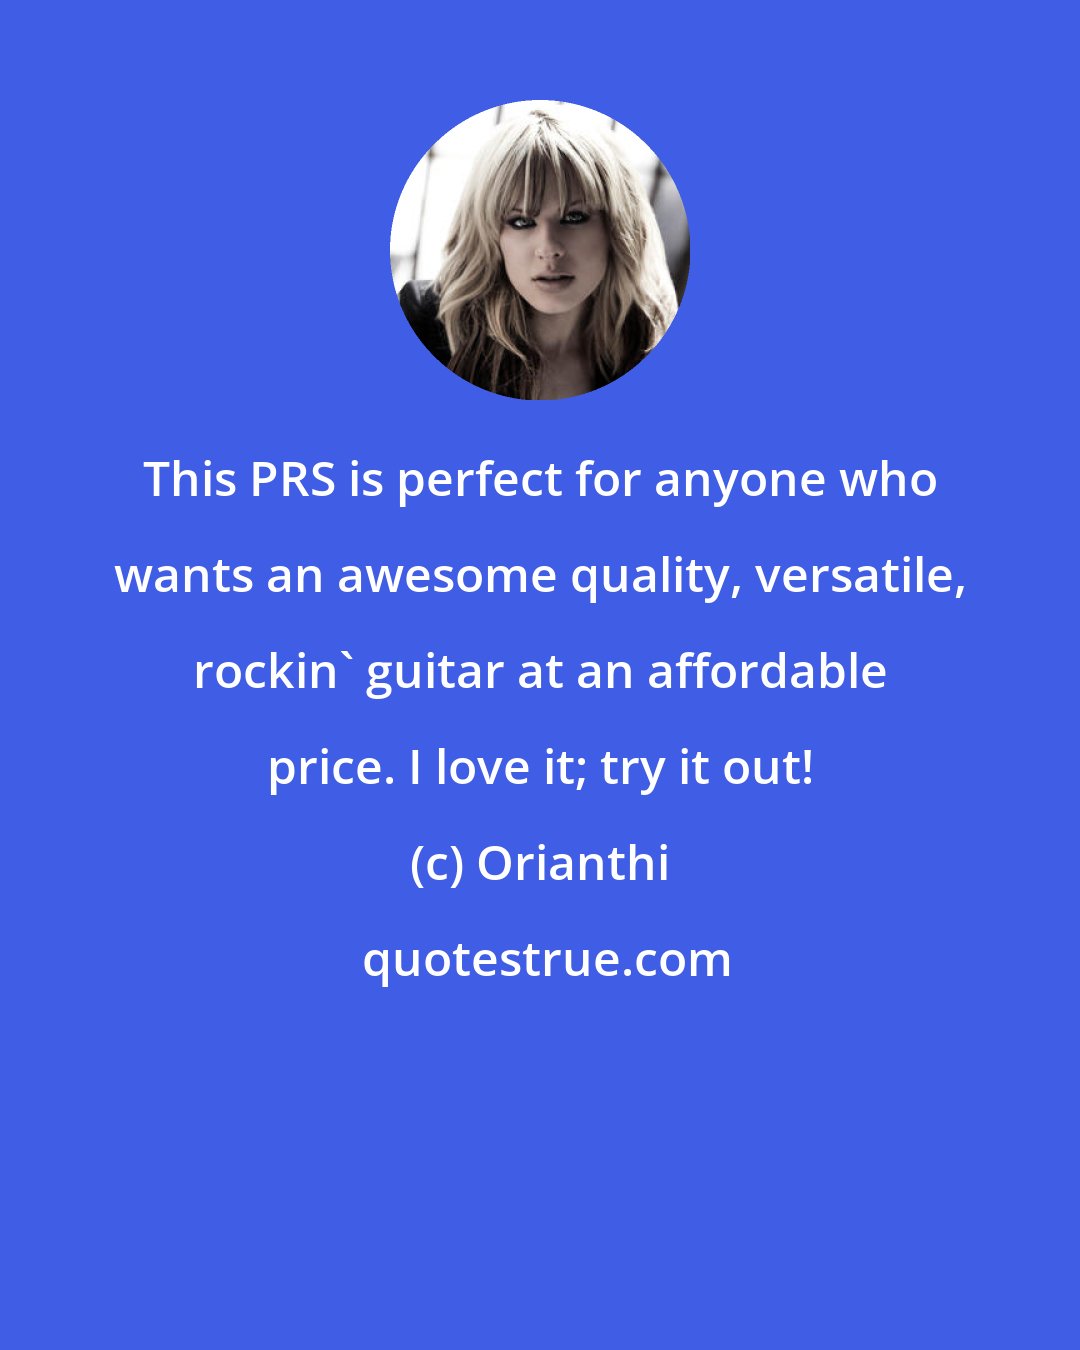 Orianthi: This PRS is perfect for anyone who wants an awesome quality, versatile, rockin' guitar at an affordable price. I love it; try it out!